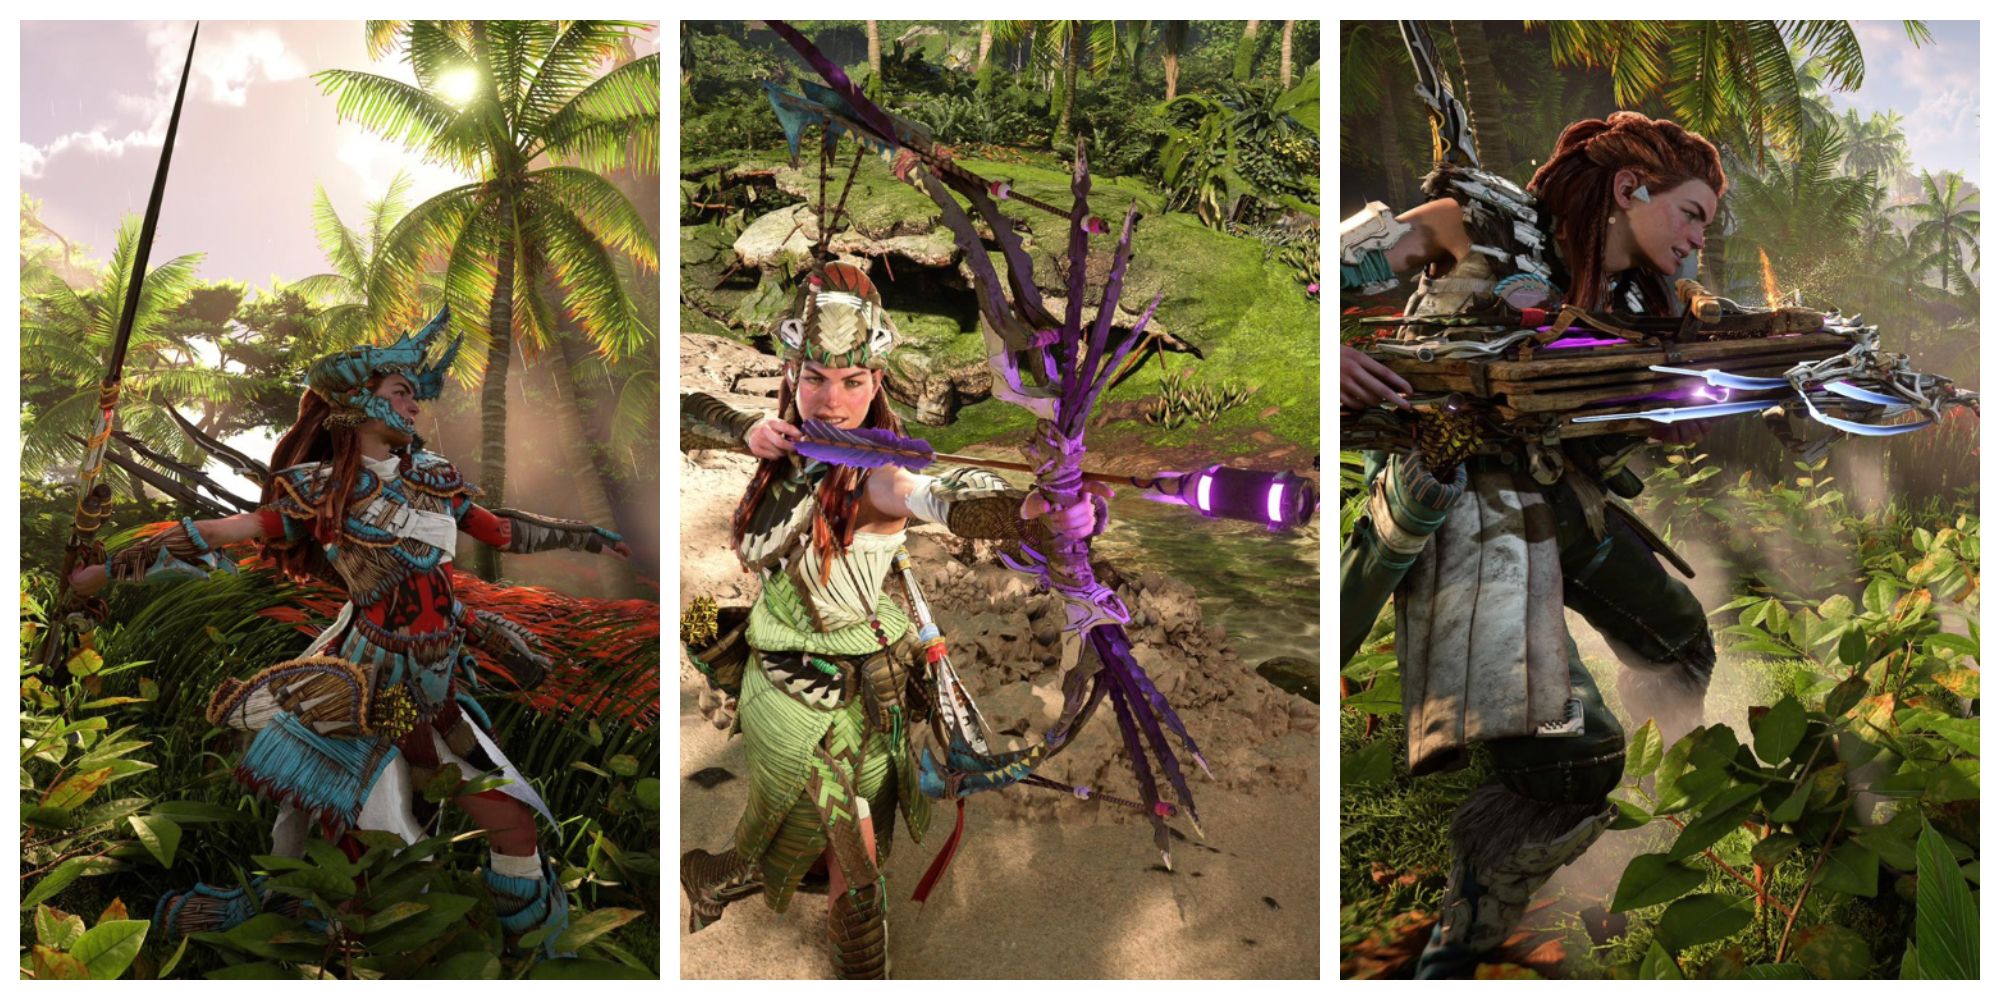 Aloy throwing a large, metal spear; aloy pulling back a glowing purple arrow on a large bow; and aloy holding a large crossbow 